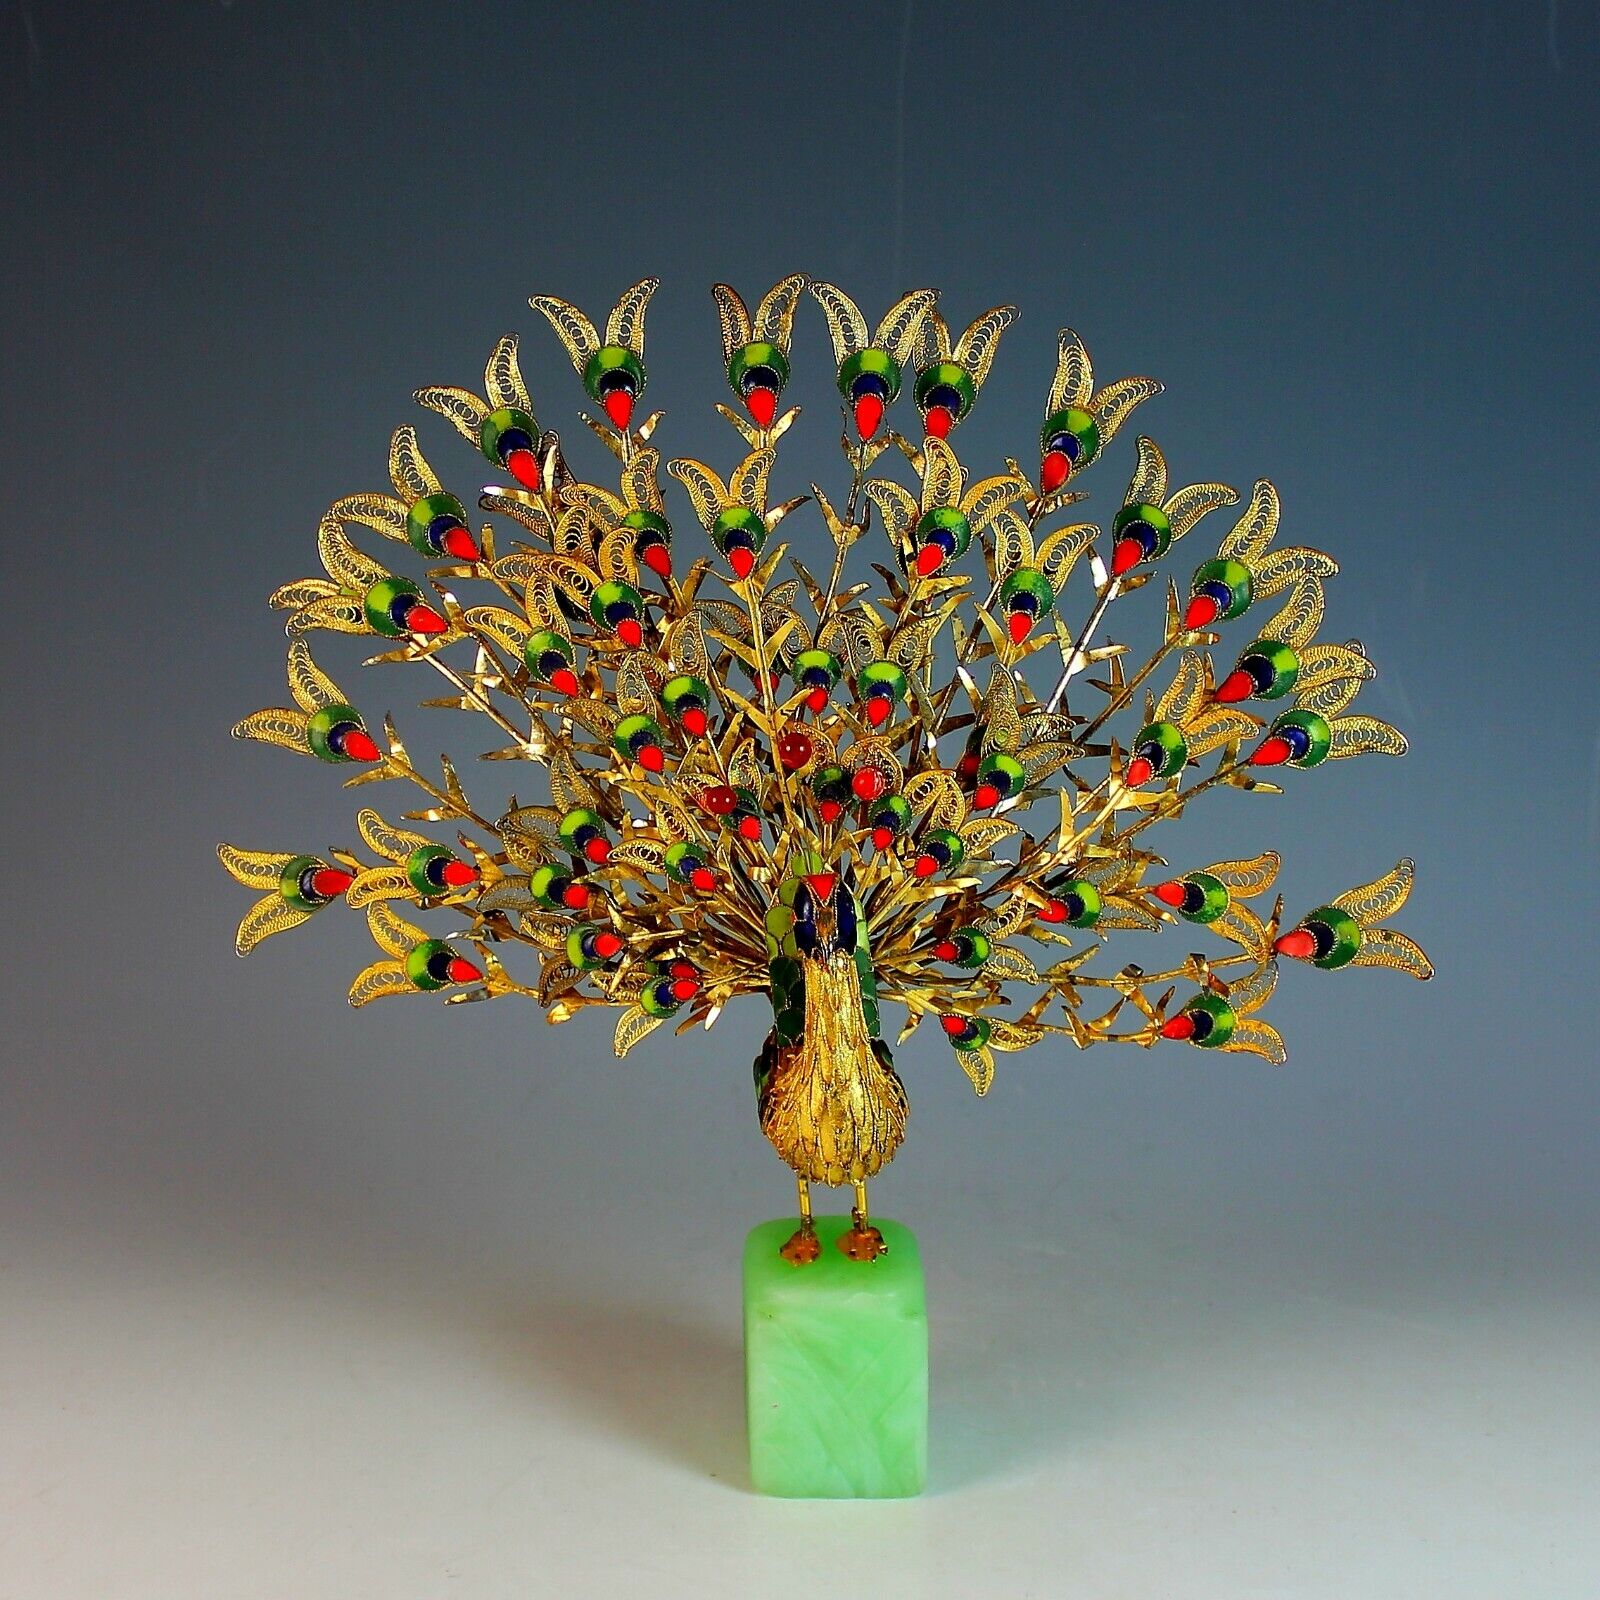 Cloisonne Peacock Bird Sculpture with Feathers on Green Stone Base